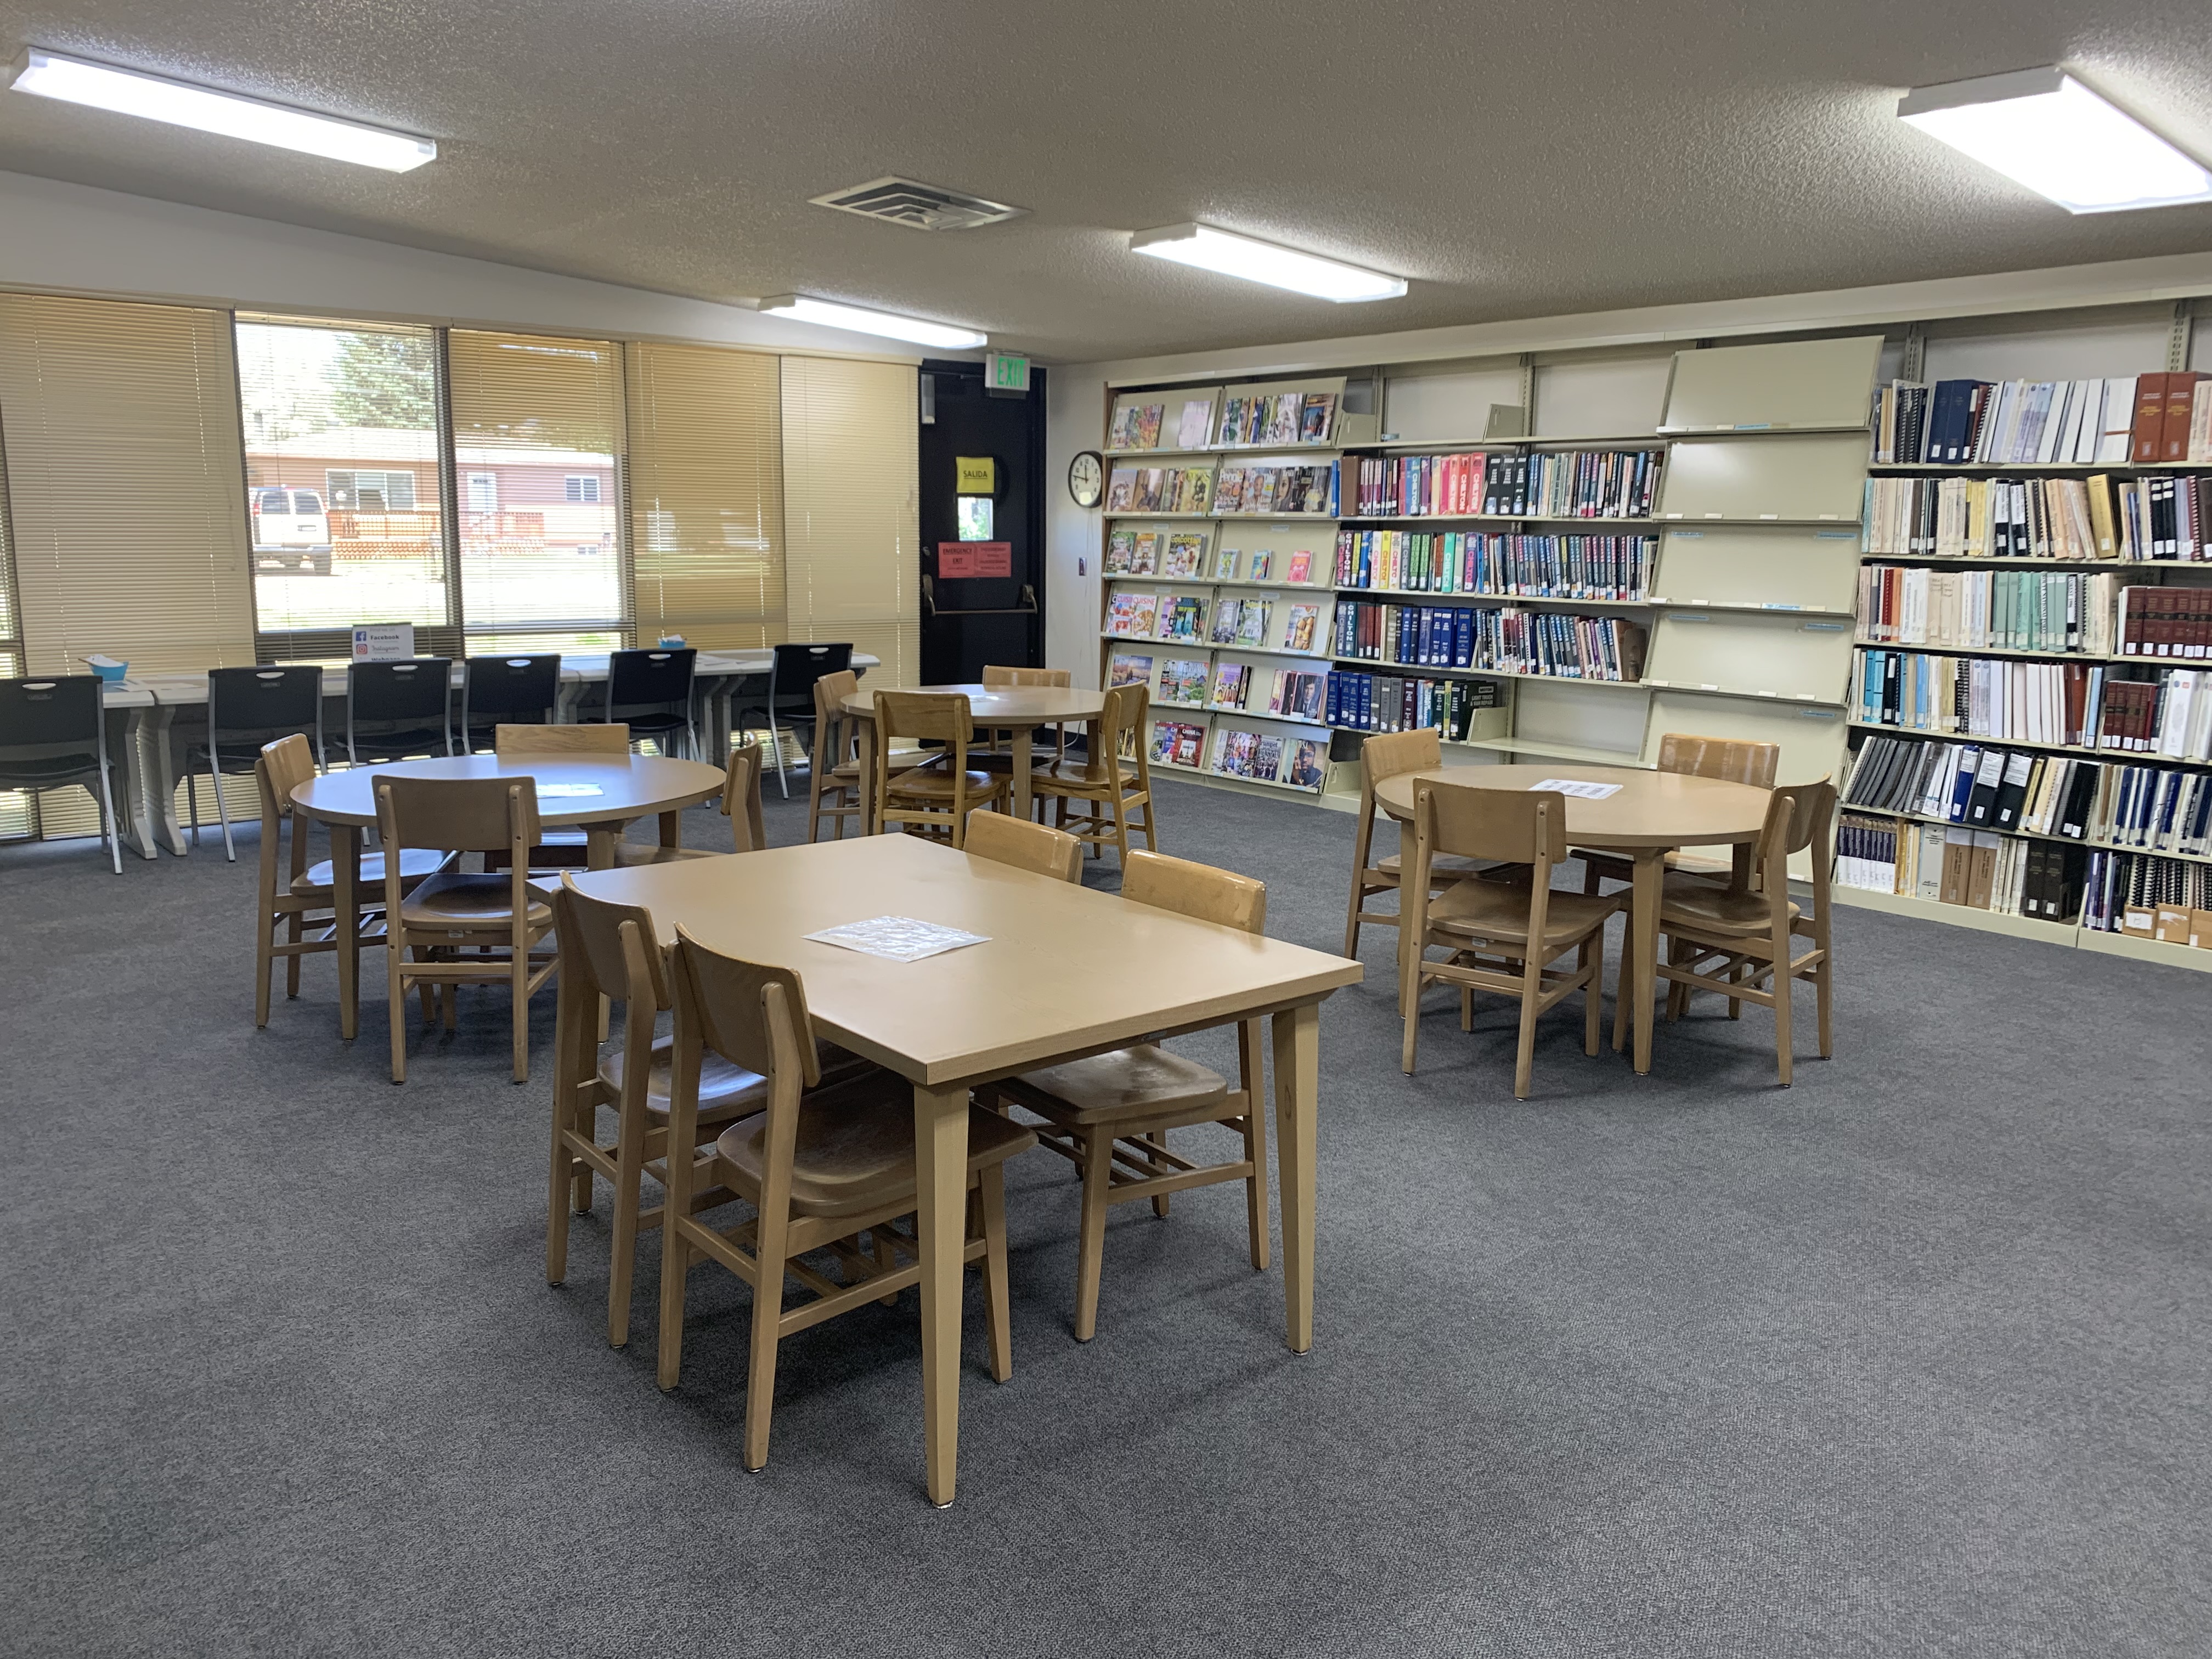 Library work area with tables and chairs